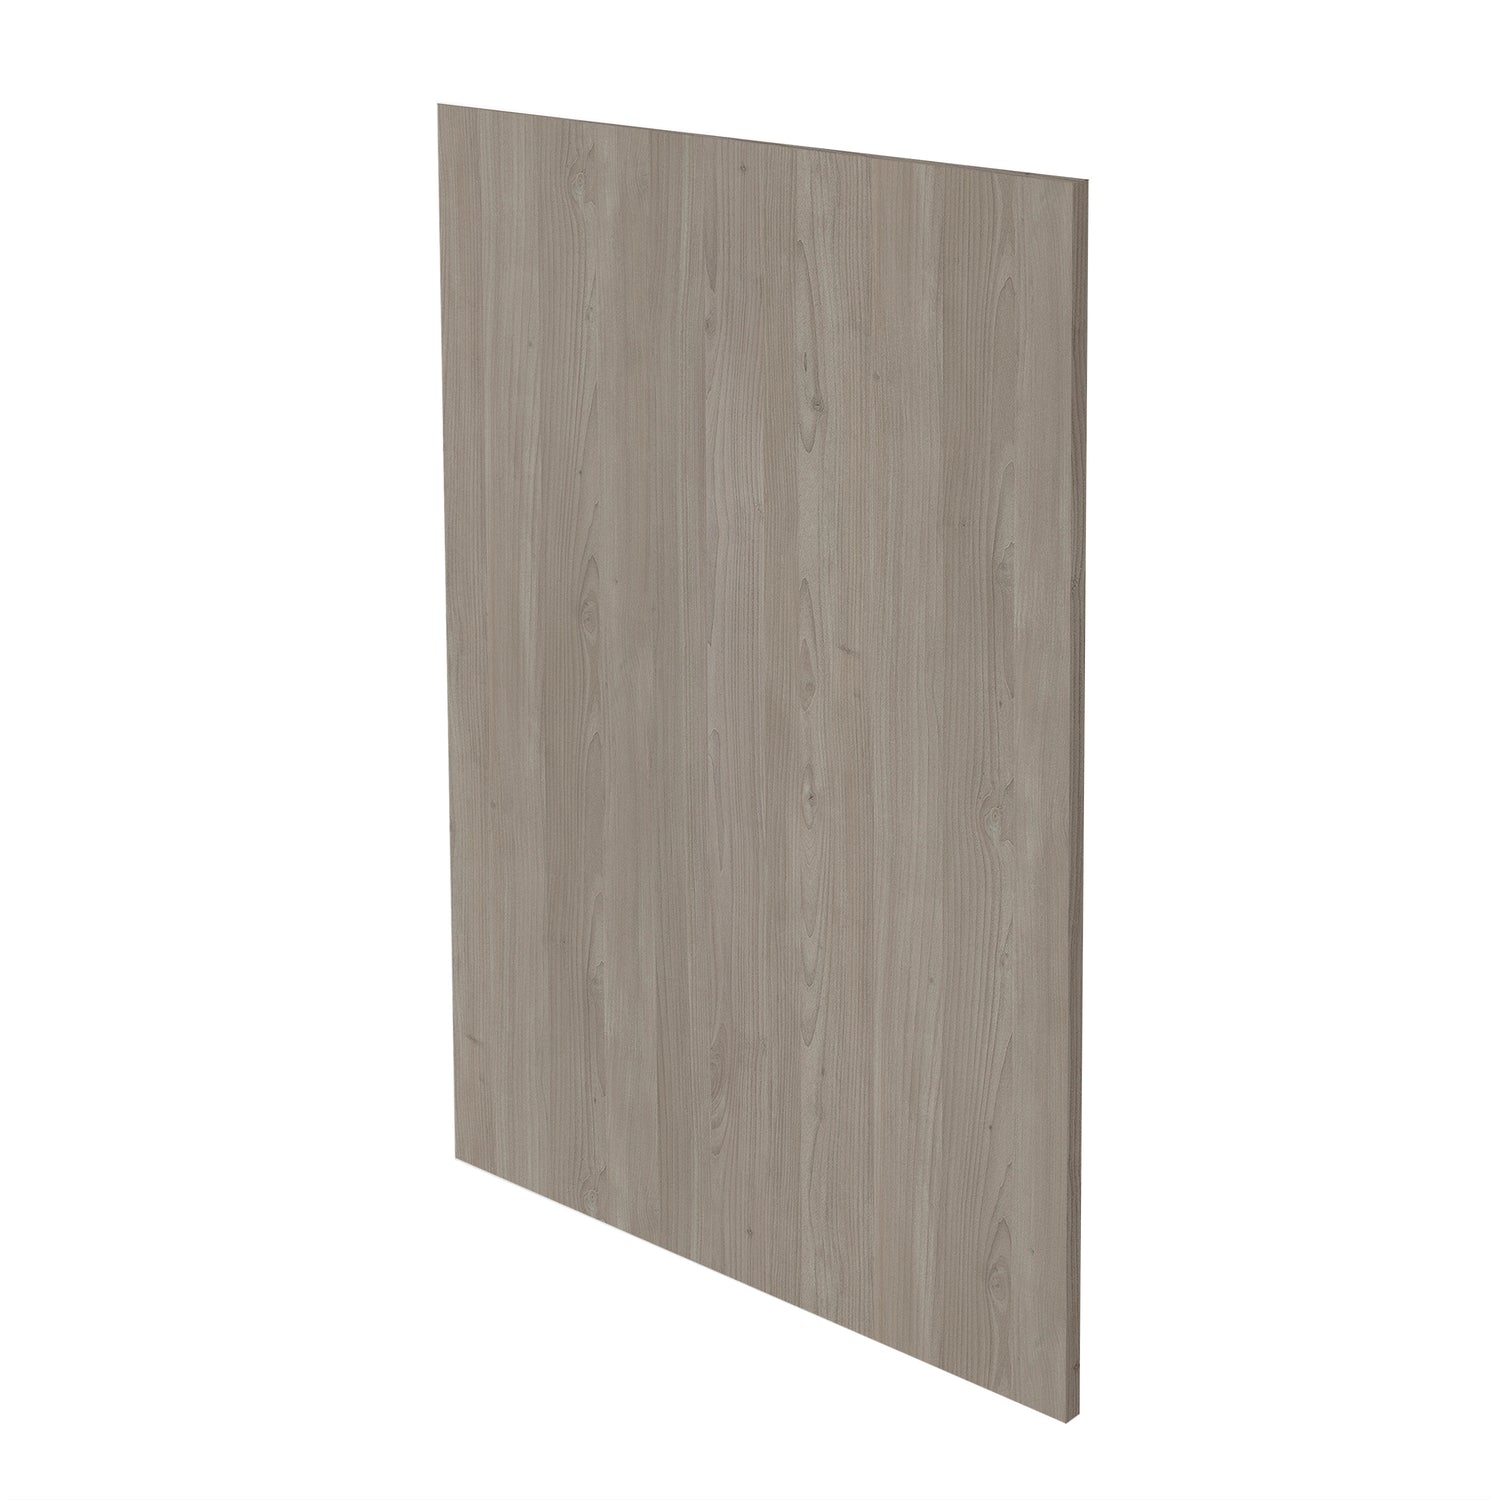 Grey Nordic Slab Style Base Kitchen Cabinet End Panel (36 in W x 0.75 in D x 34.5 in H)